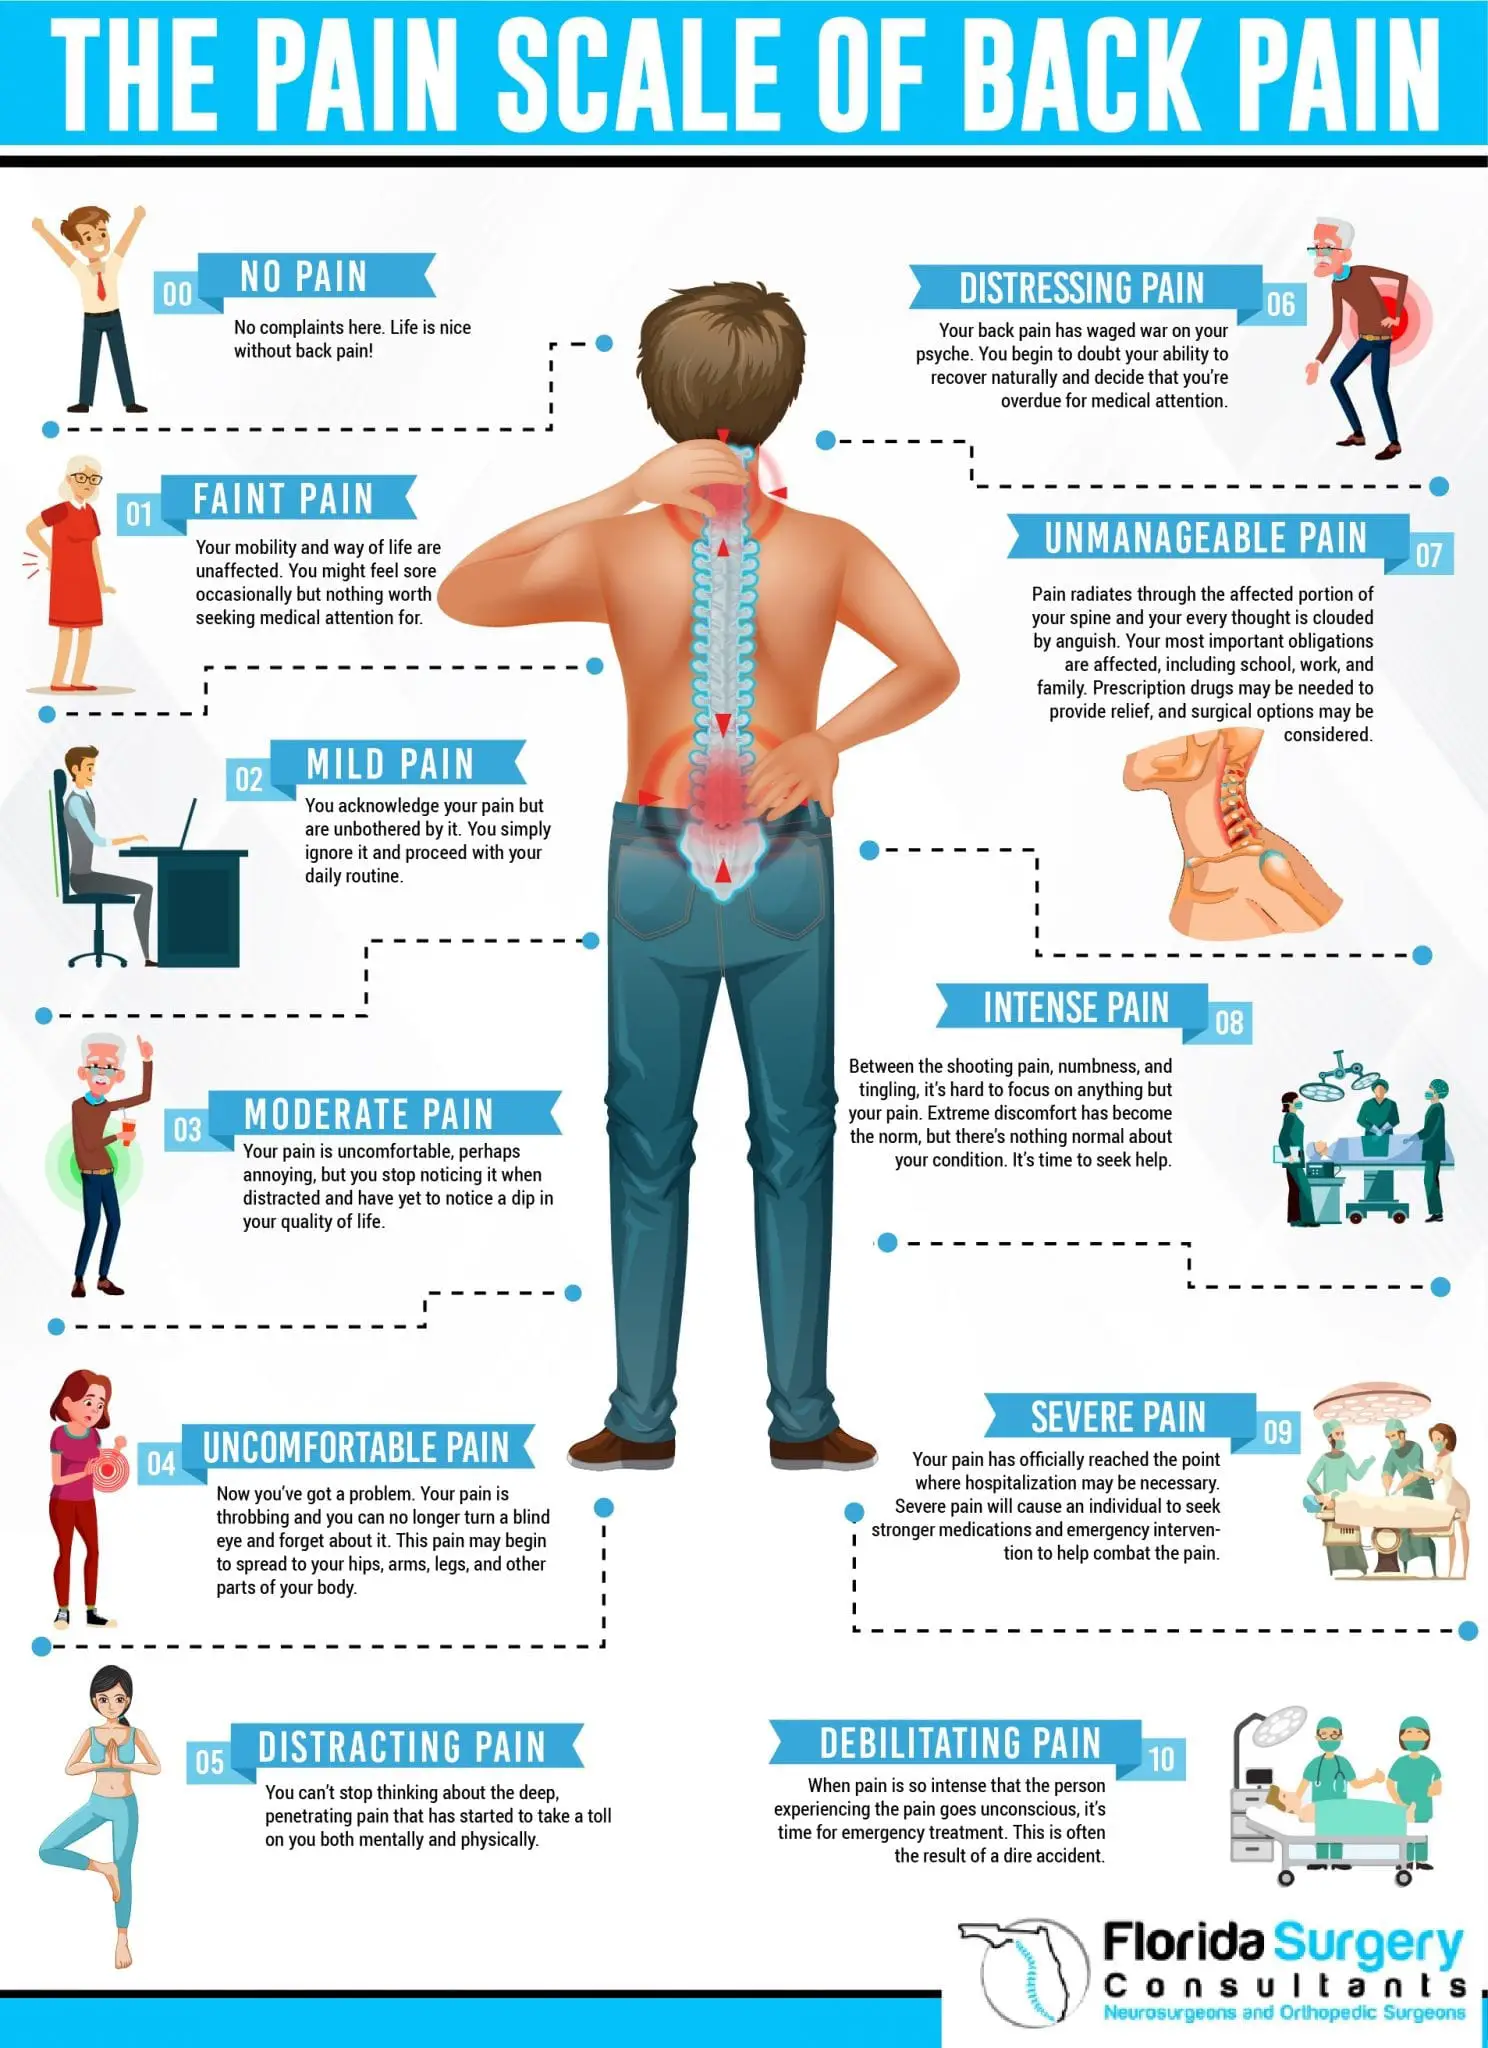 The Pain Scale of Back Pain